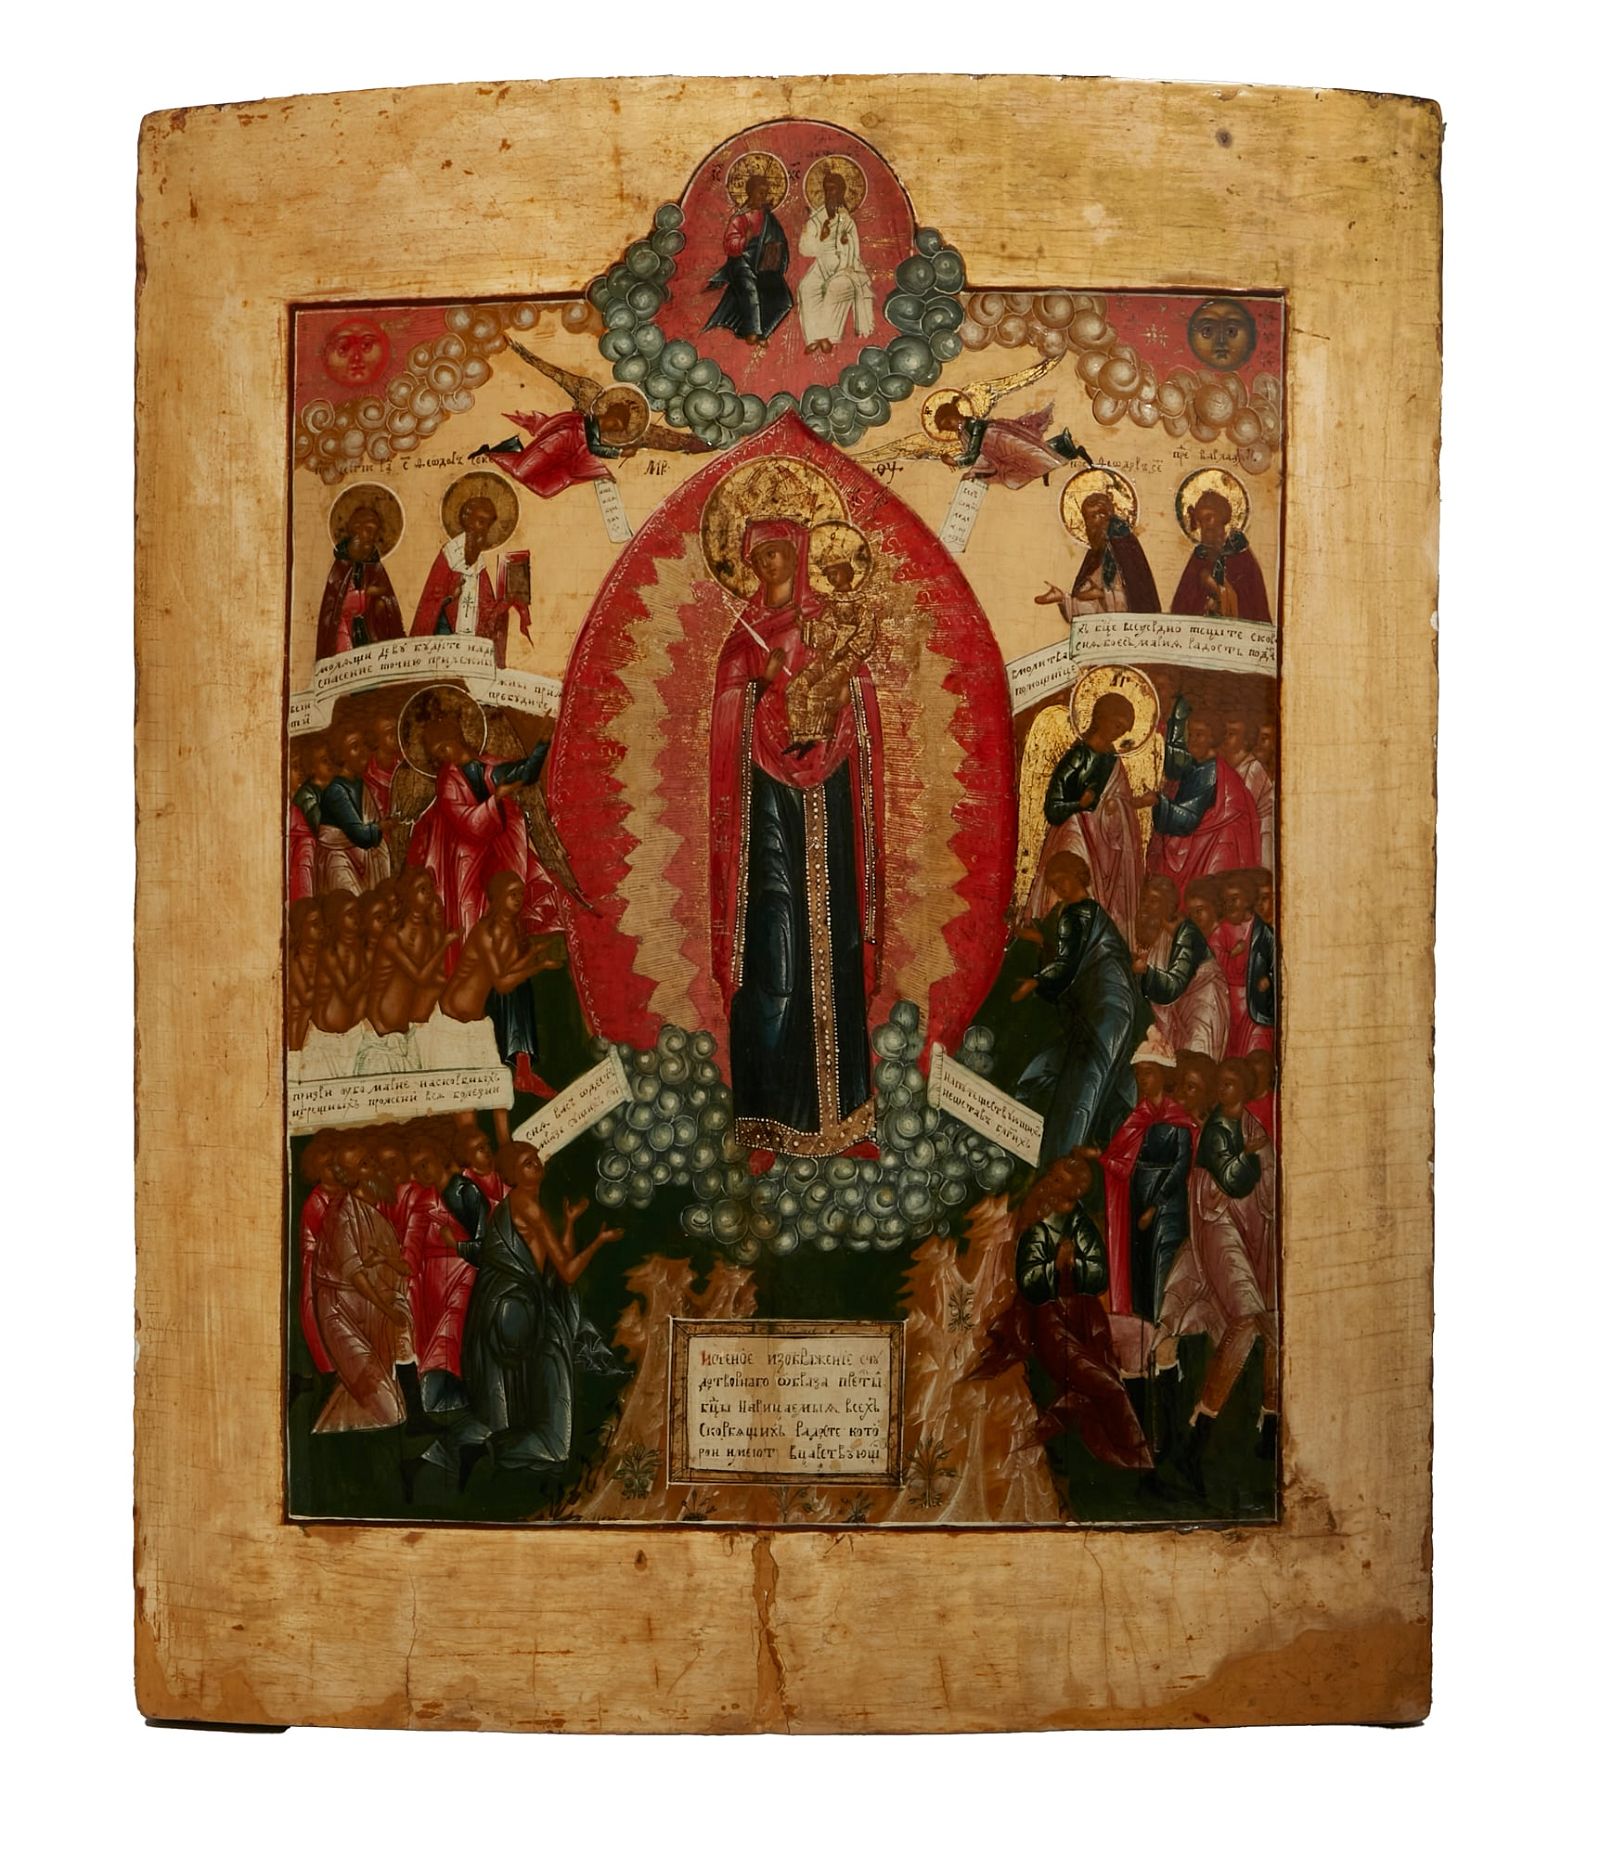 AN ICON OF THE VIRGIN OF JOY TO